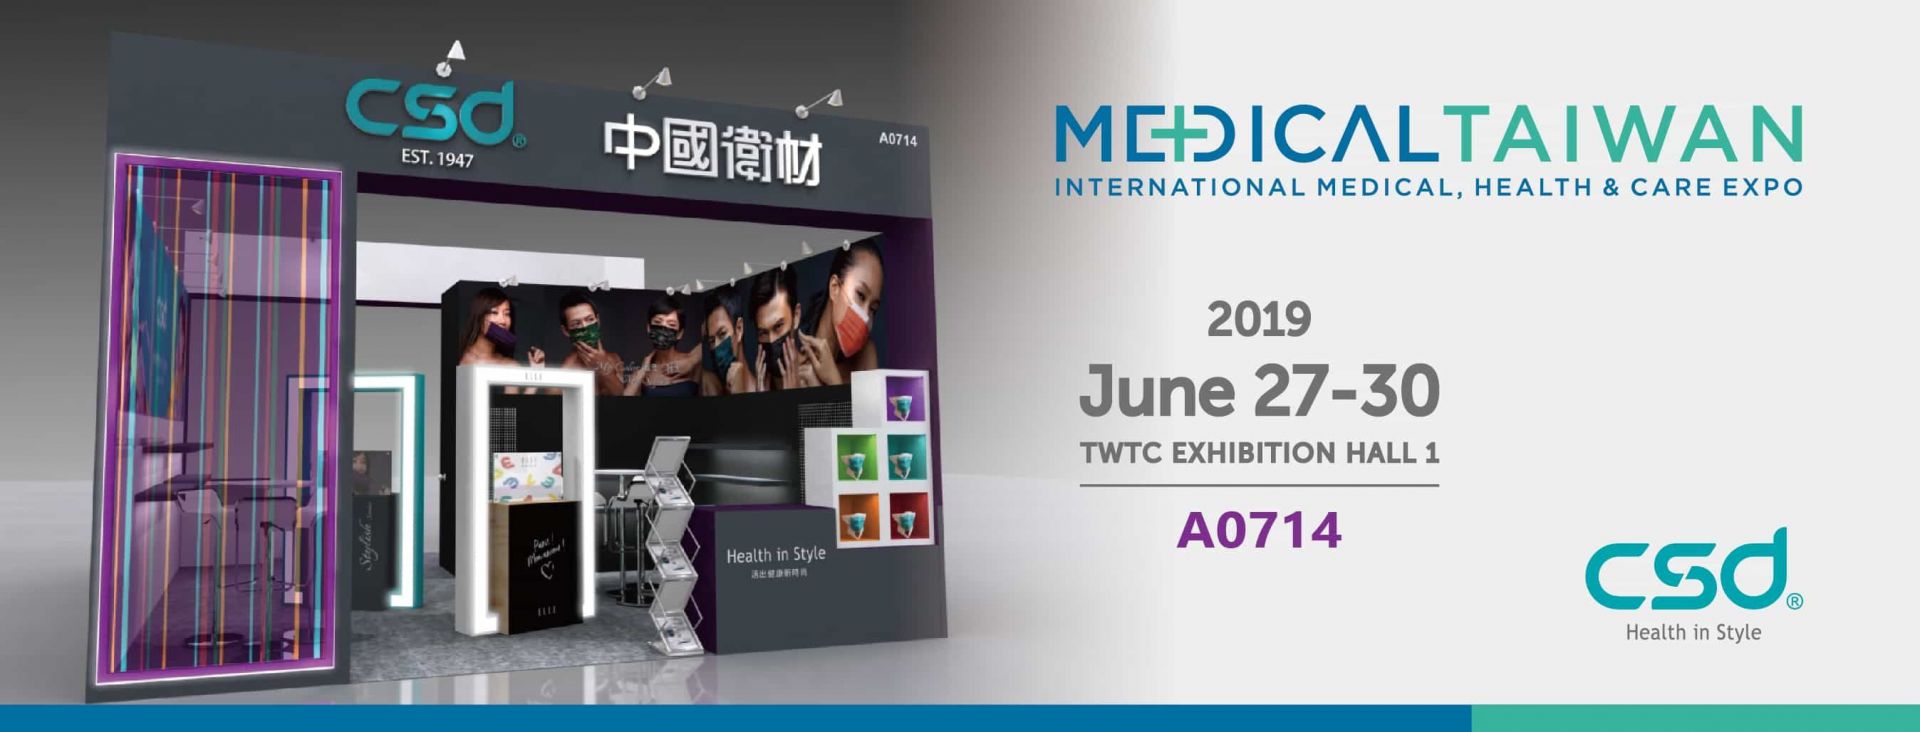 2019 Medical Taiwan is coming.